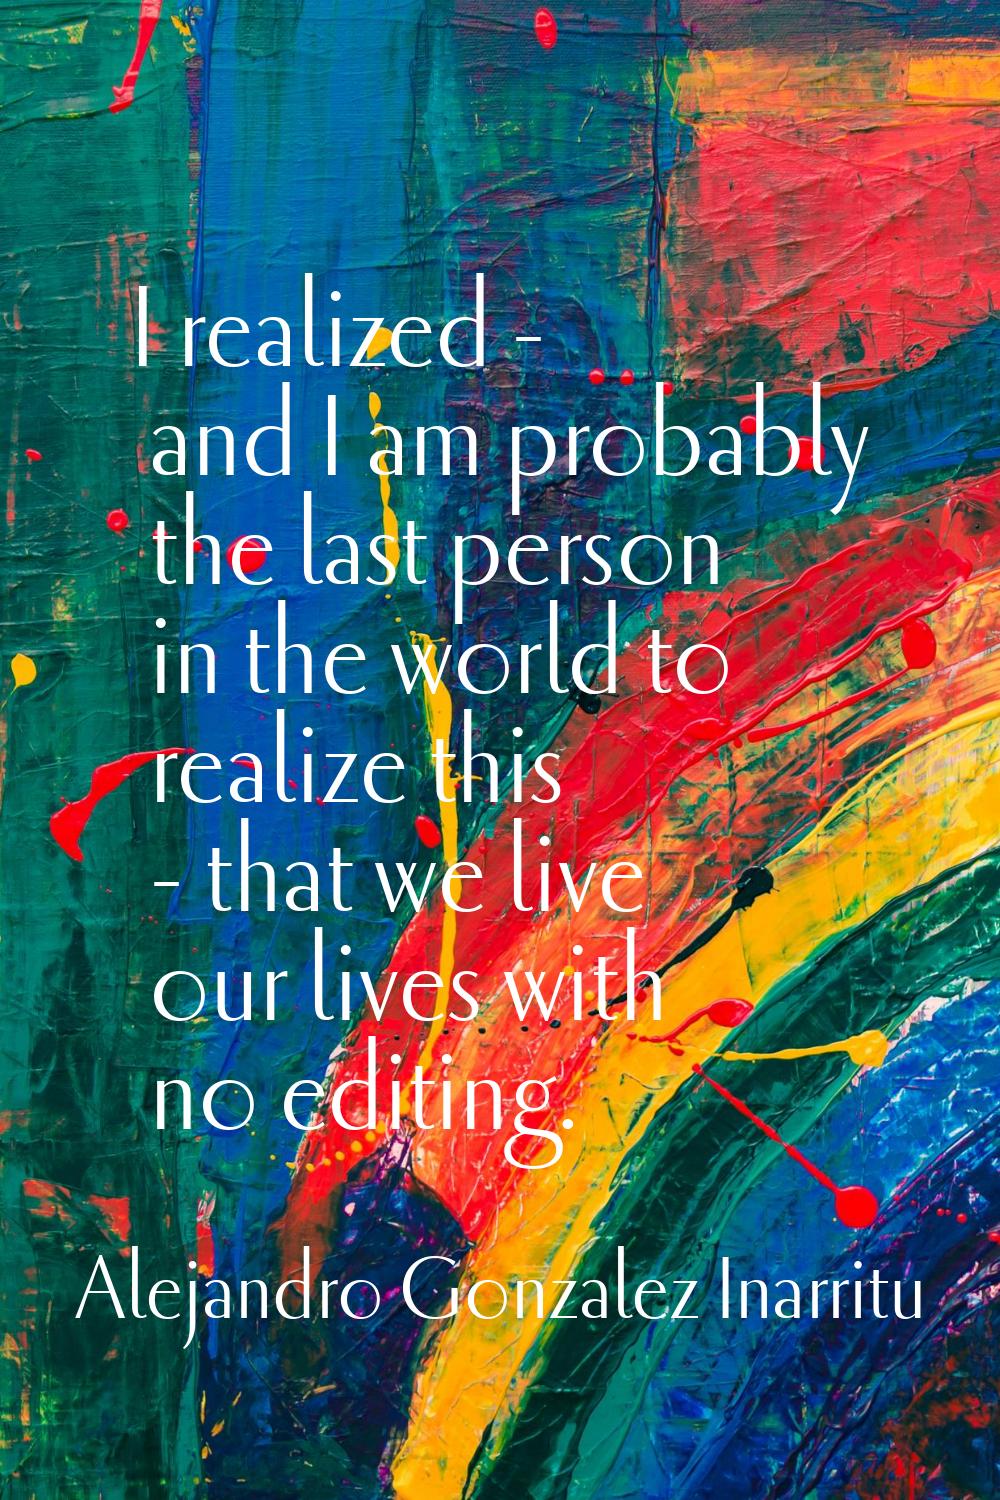 I realized - and I am probably the last person in the world to realize this - that we live our live